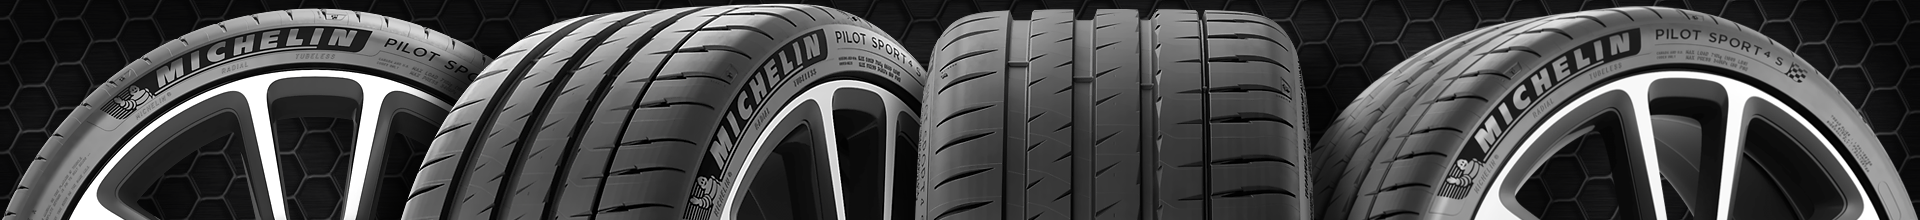 275 35 24 discount tires from Tire Outlet US